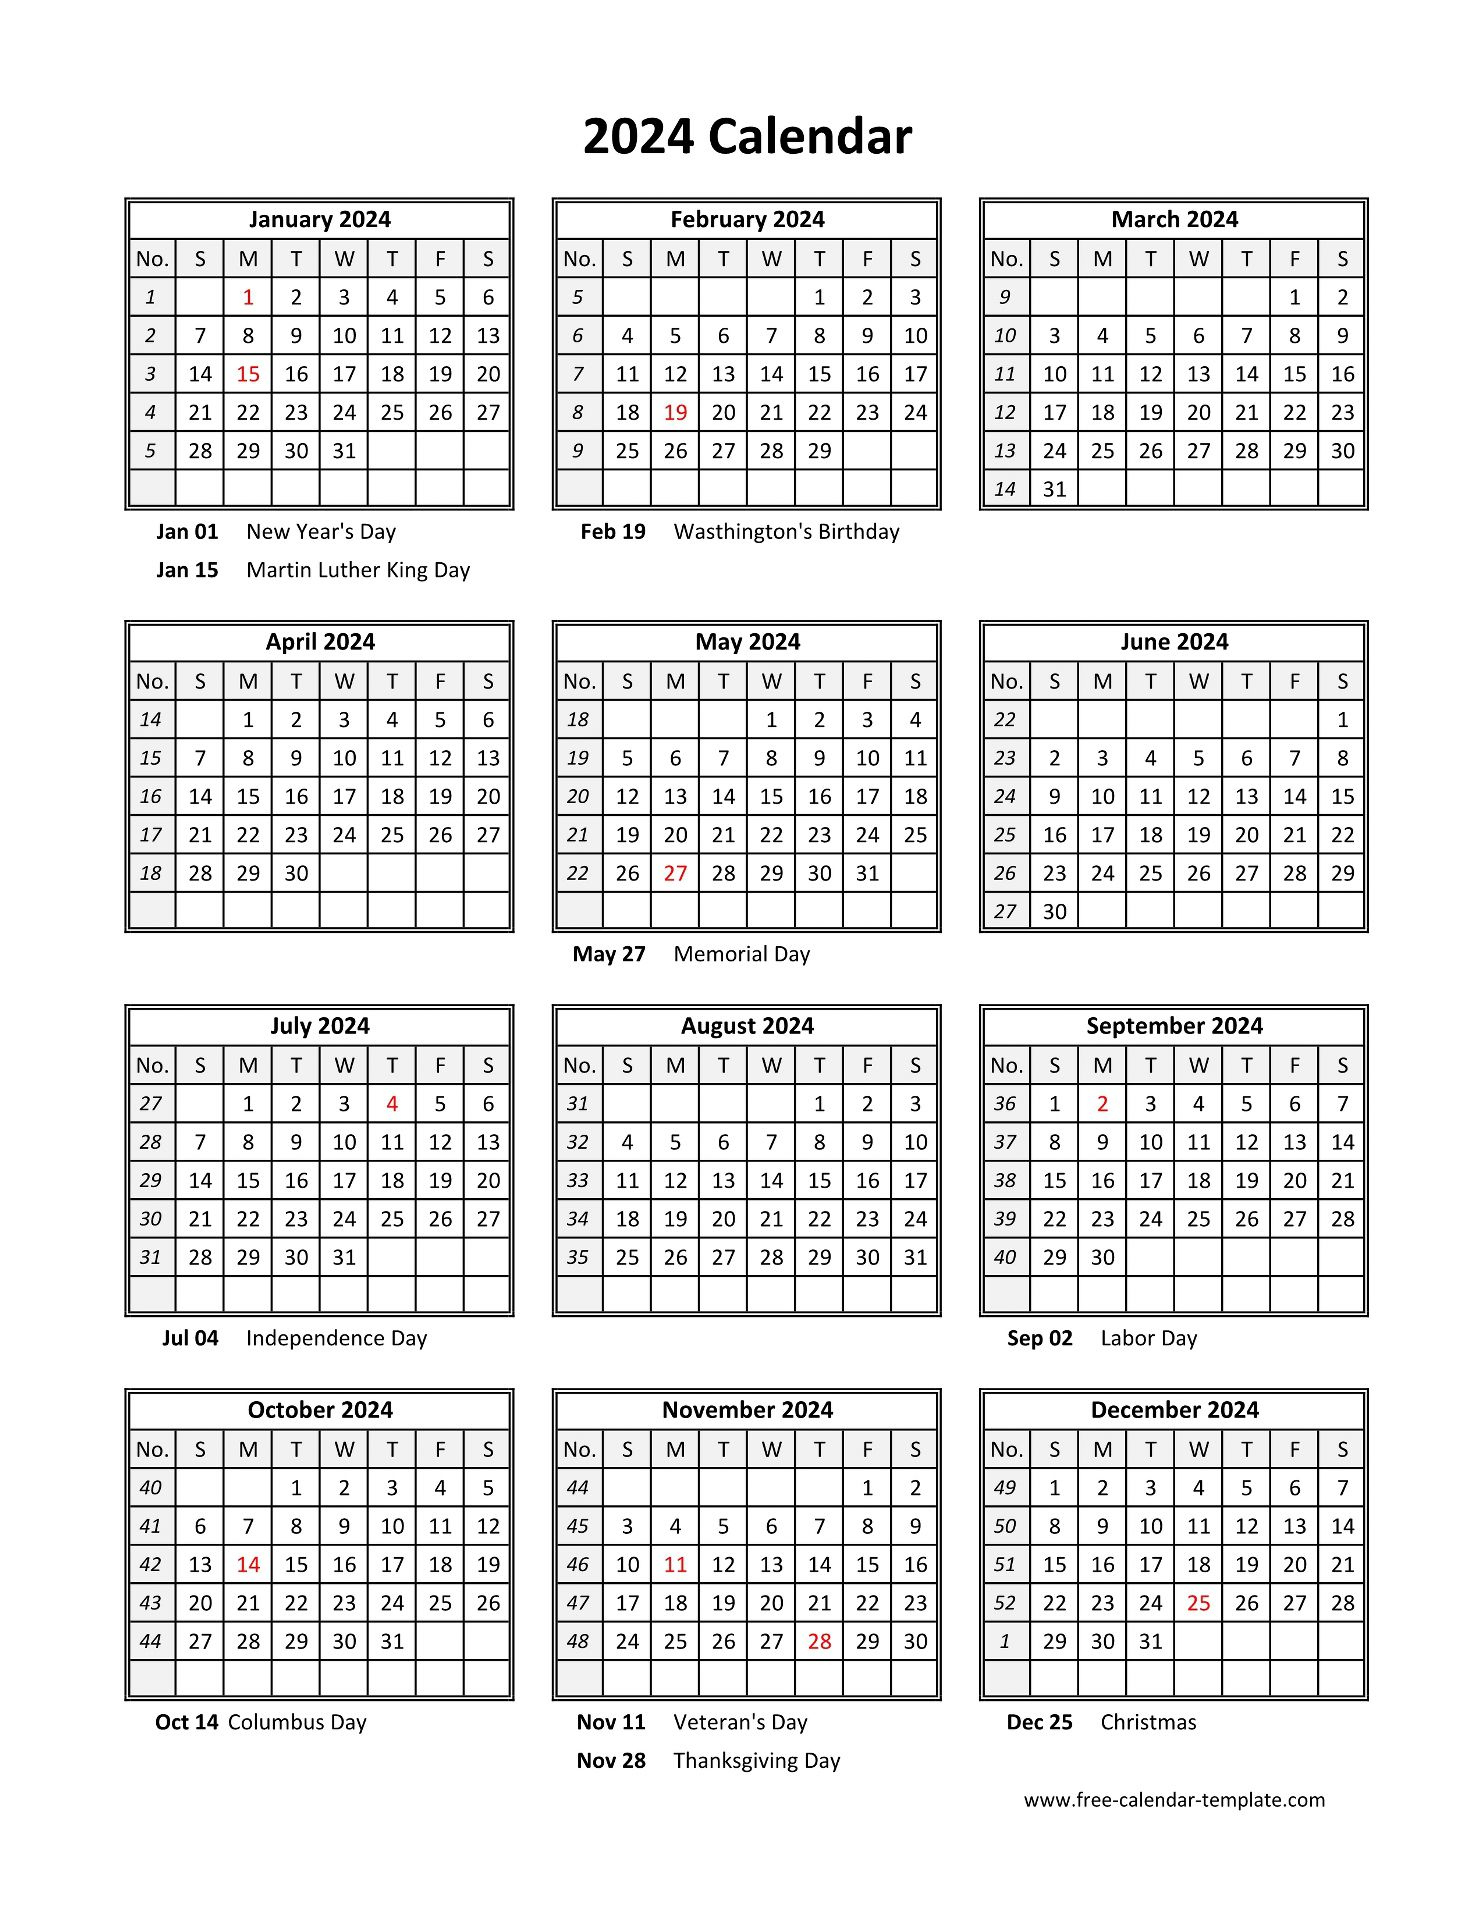 Yearly Printable Calendar 2024 With Holidays | Free-Calendar | 2024 Yearly Calendar Download